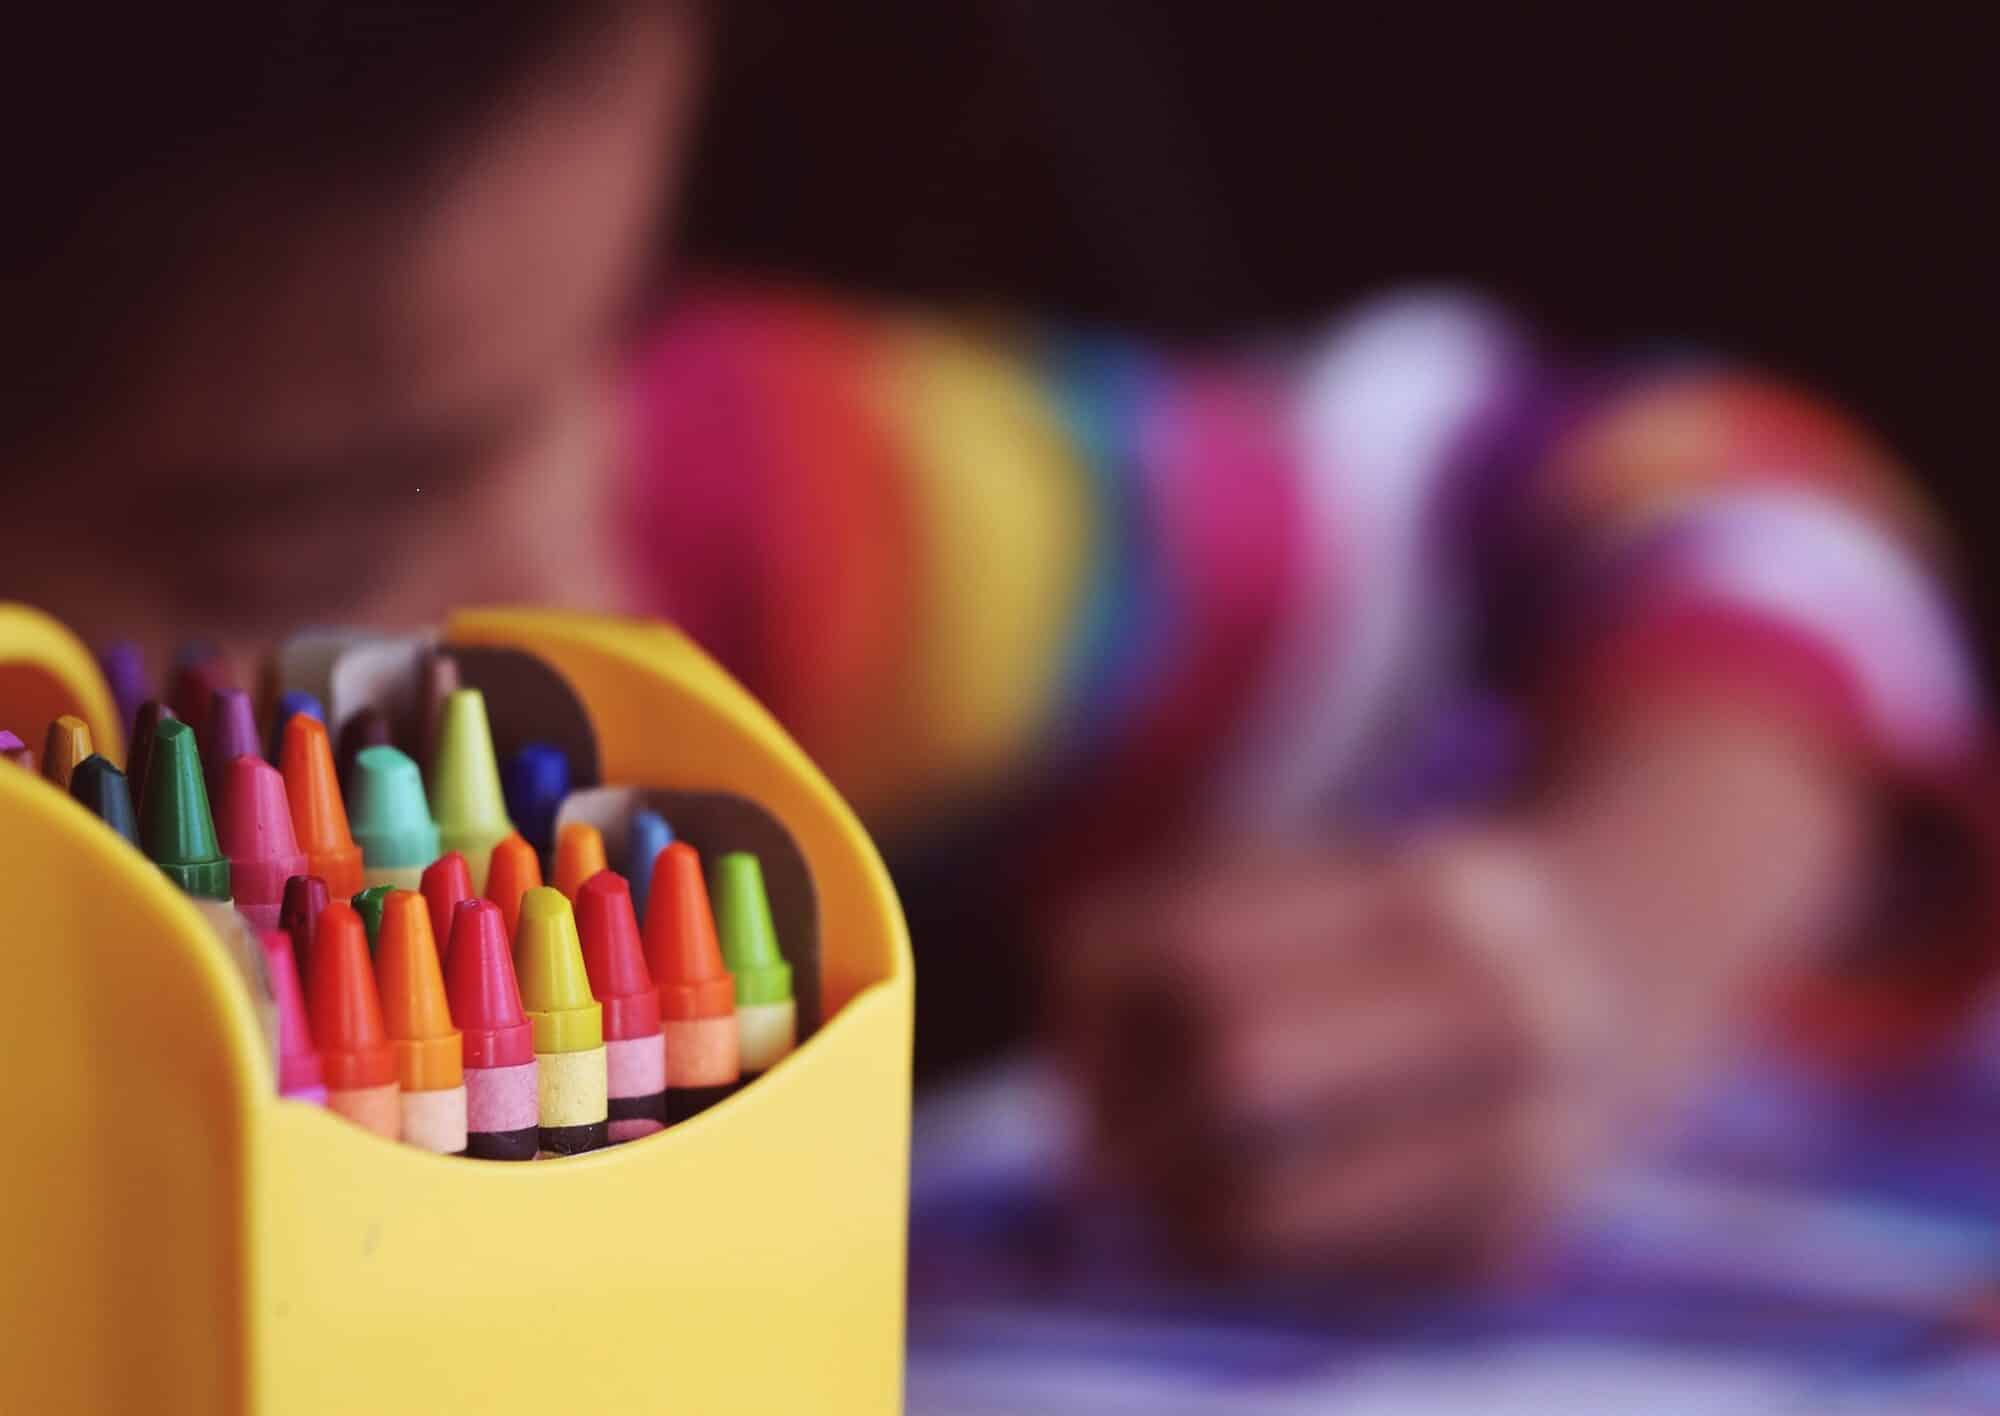 A pack of crayons in focus with a child in the background colouring.